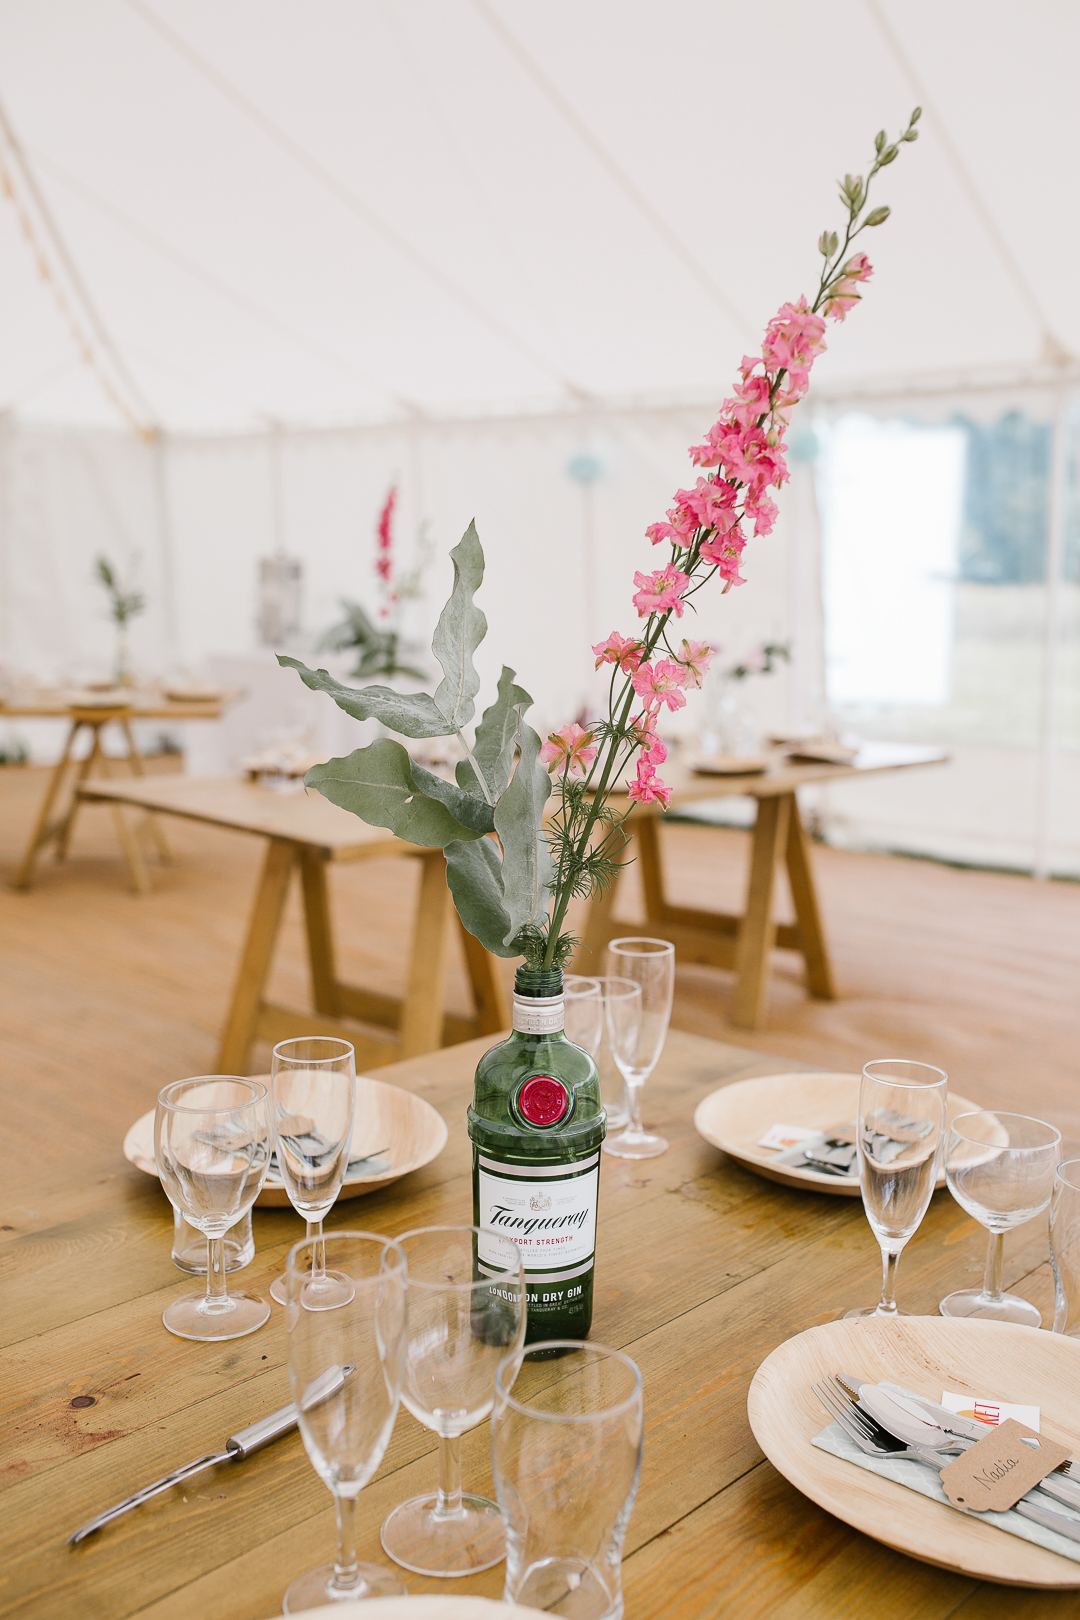 gin bottle holding wild flowers as the table centrepiece at the DIY wedding in the Cotswolds